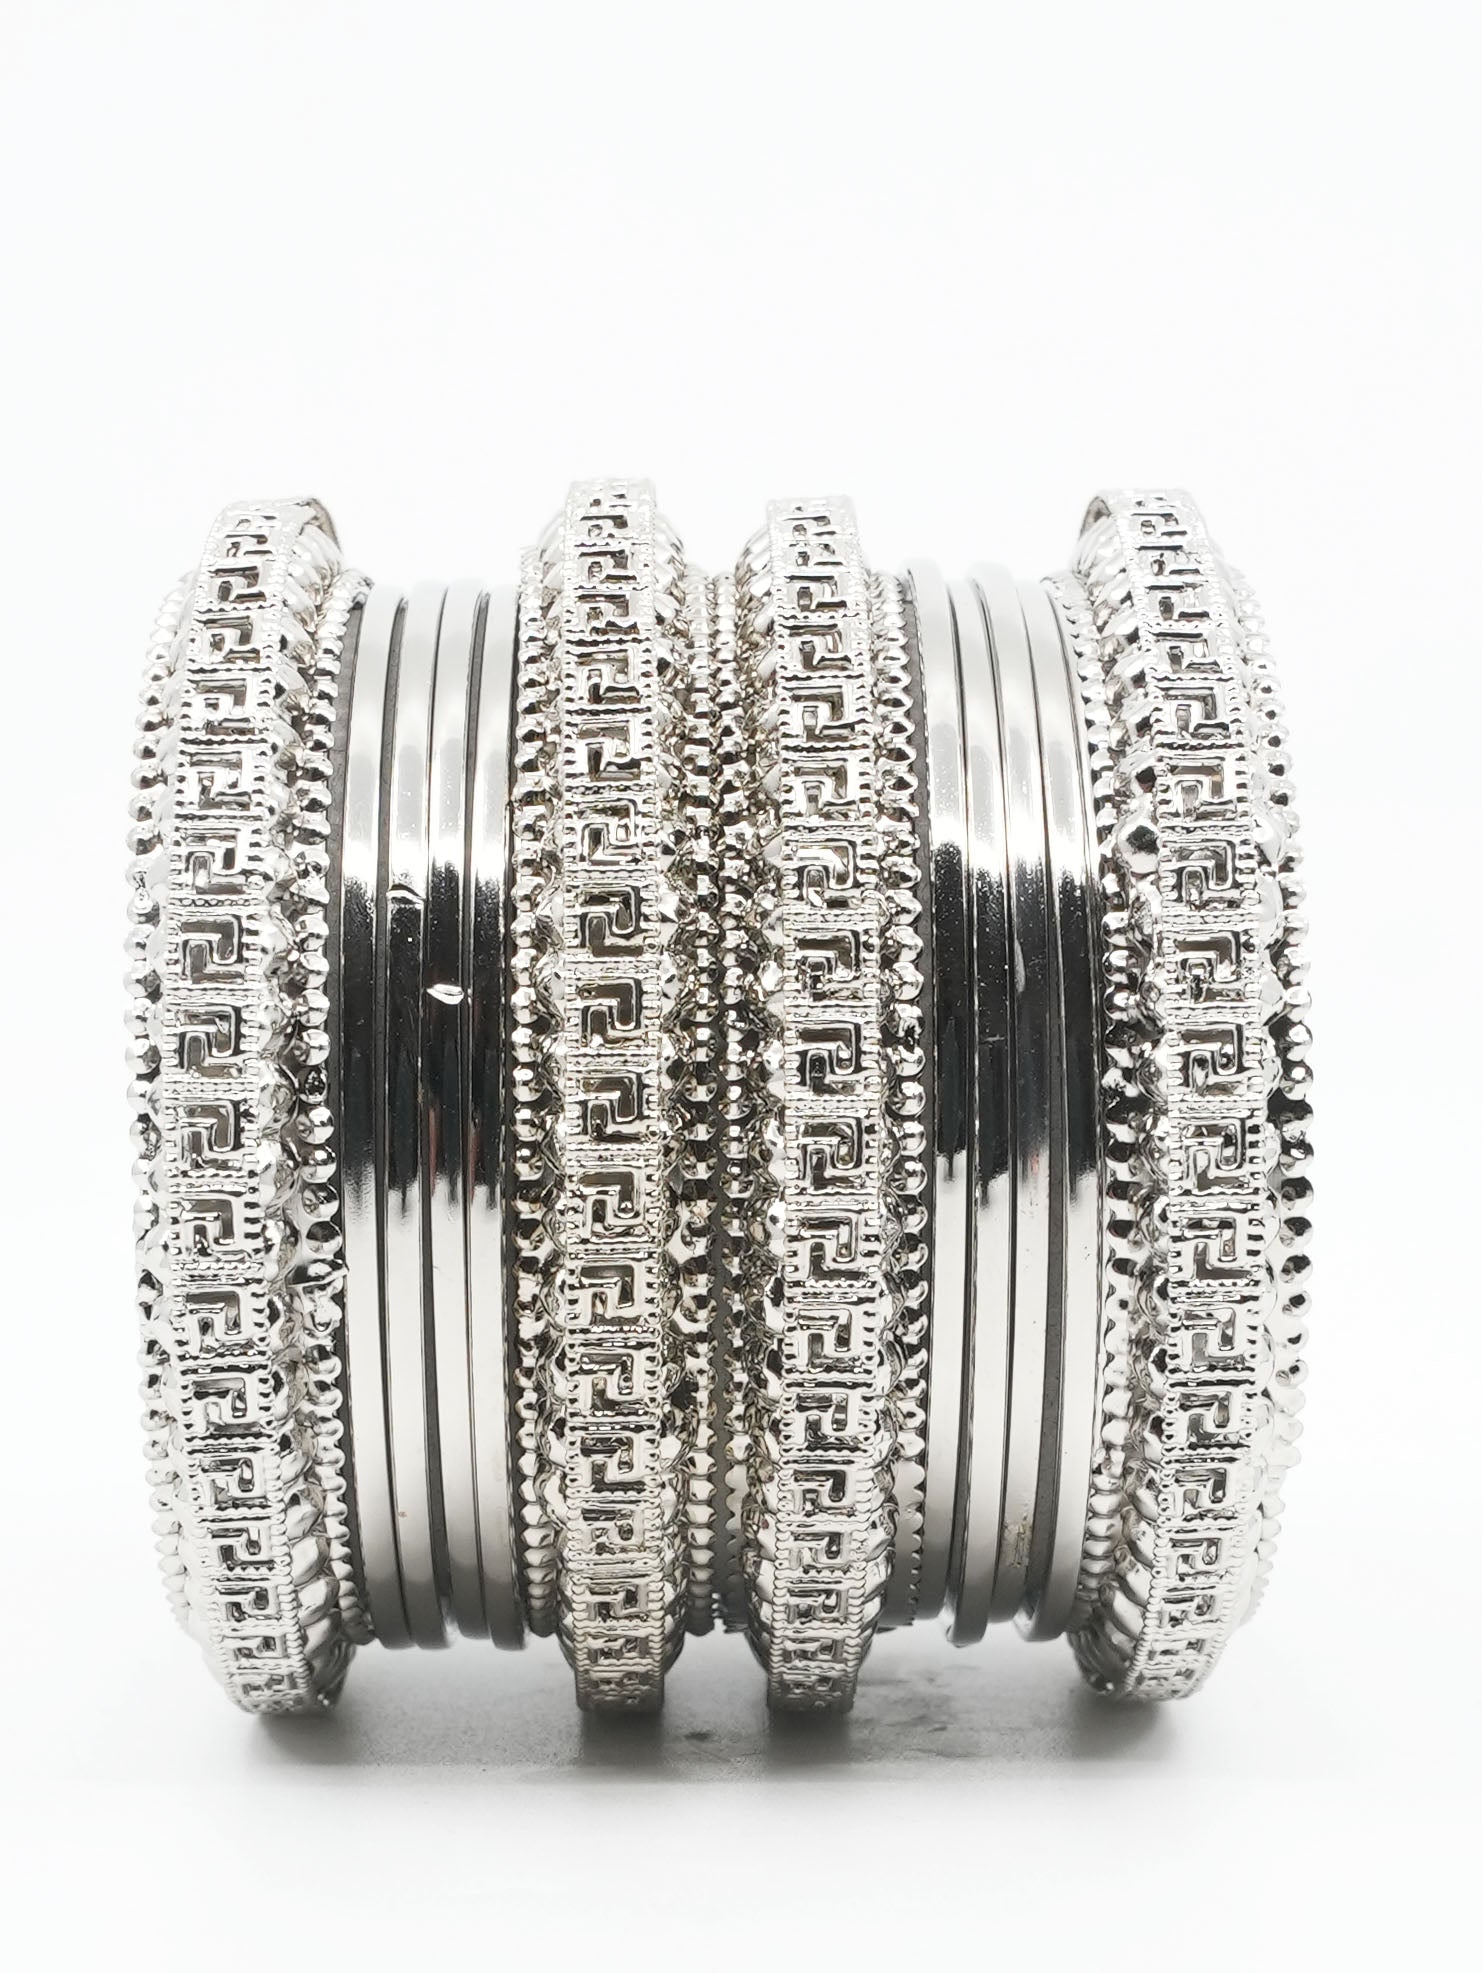 Fancy Silver Plated Bangles Set of 12 bangles 11422K